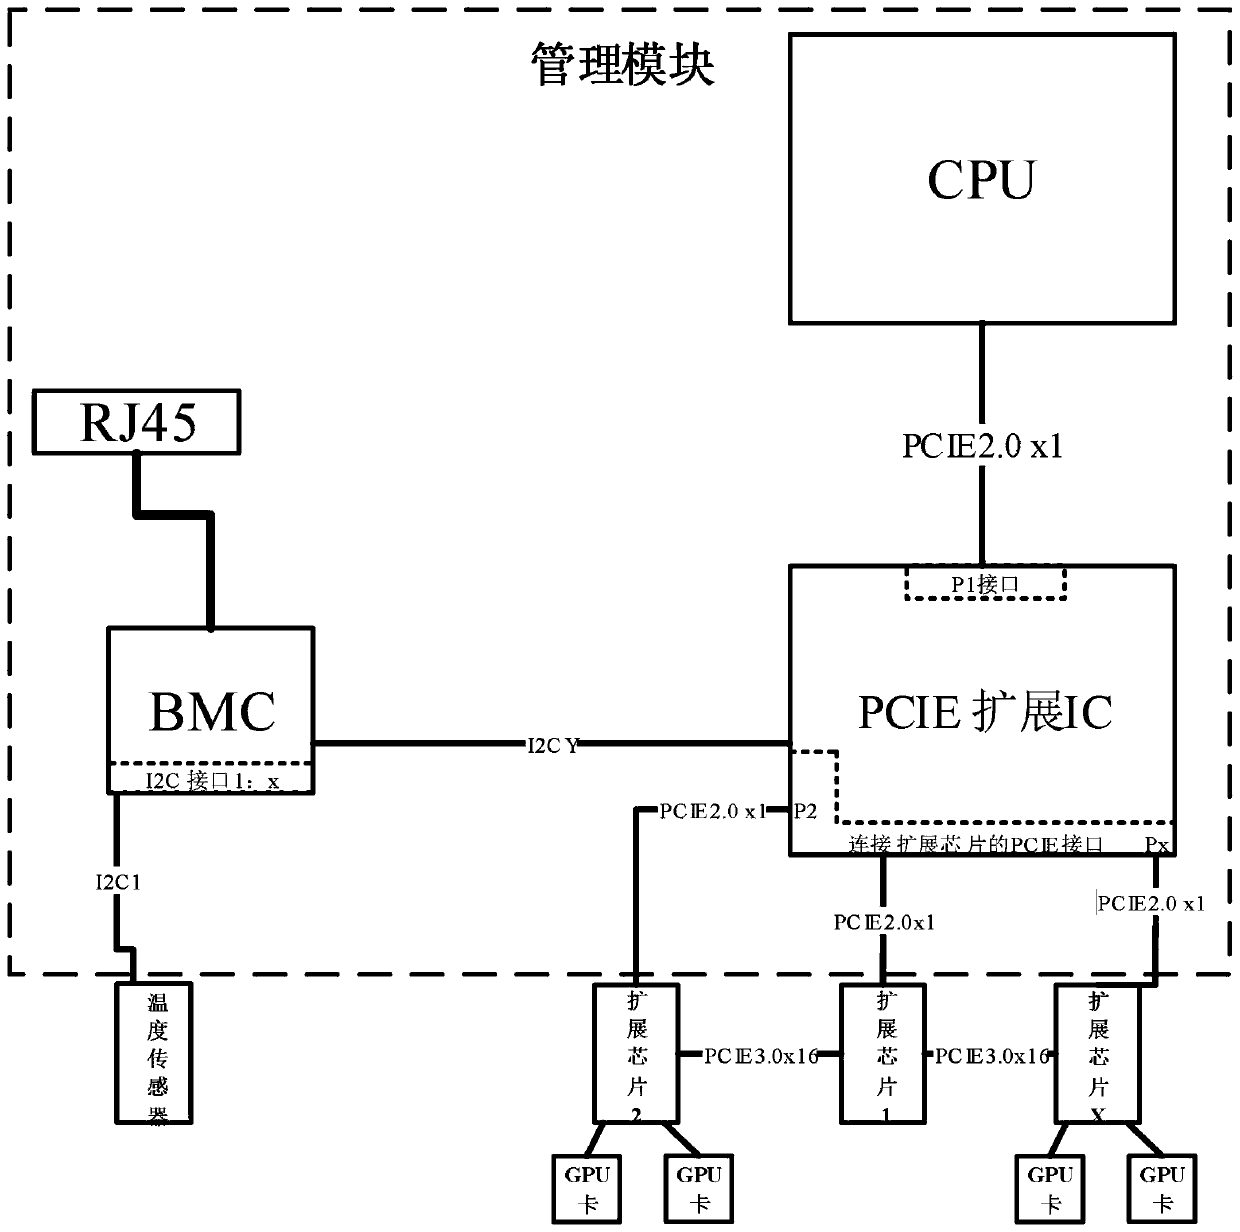 A GPU card cluster configuration control system and method